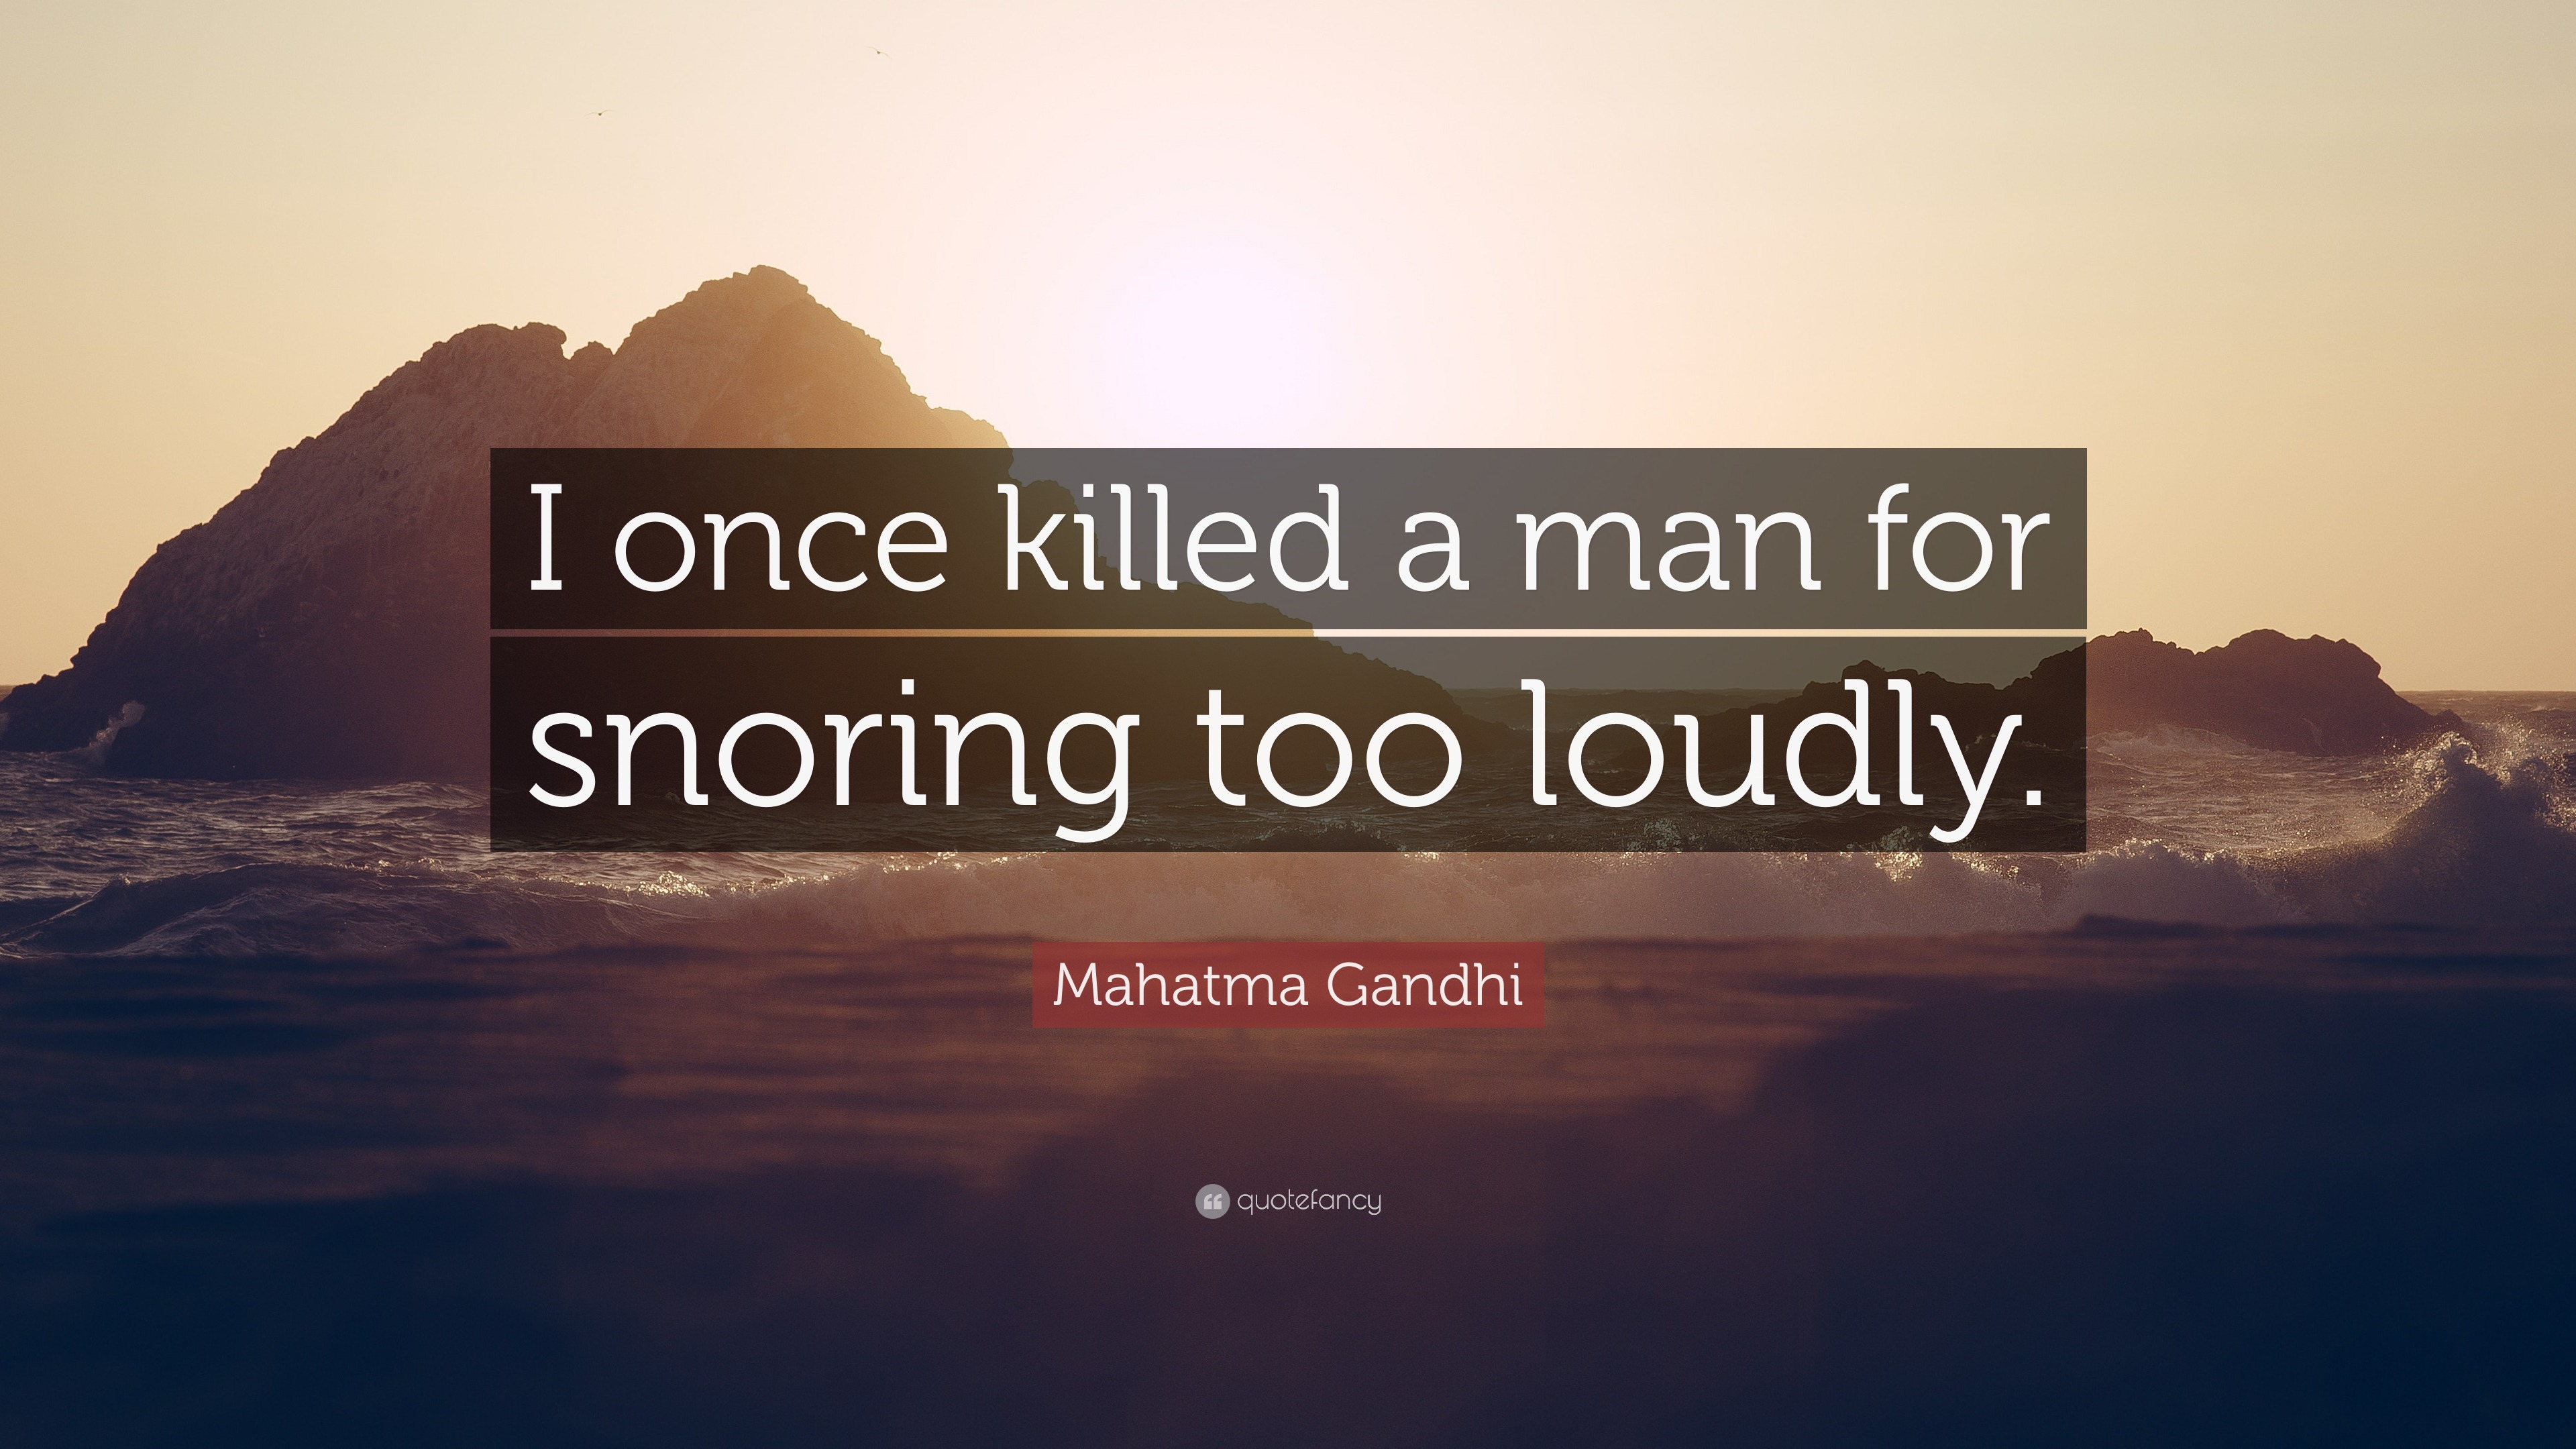 Mahatma Gandhi Quote: "I once killed a man for snoring too ...